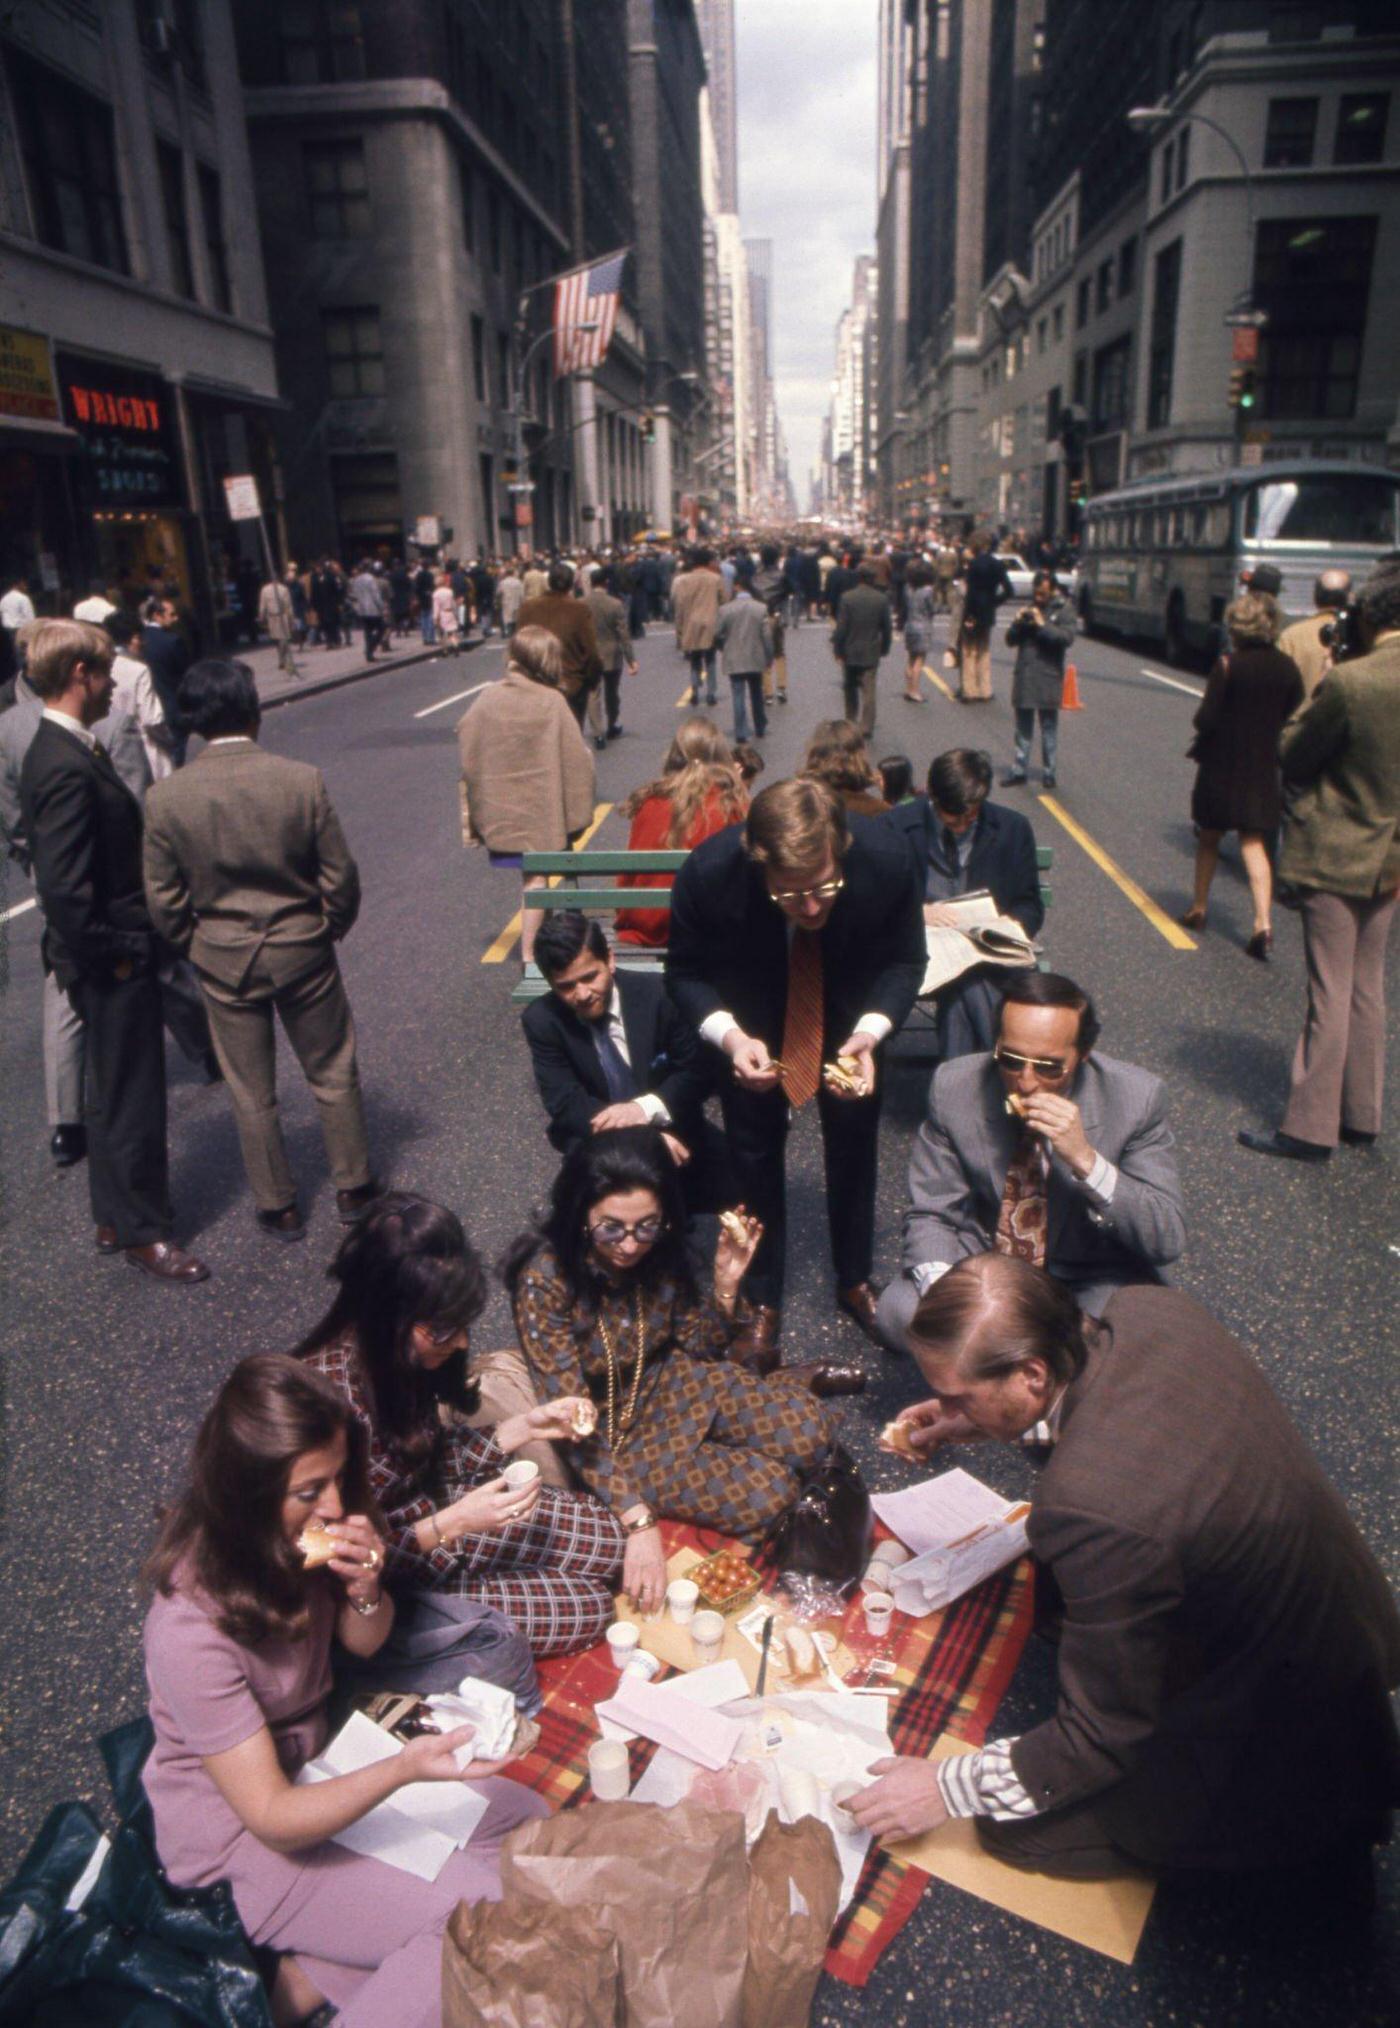 People Enjoying Madison Avenue Closed For Earth Week Celebration In Manhattan, Date Unknown.